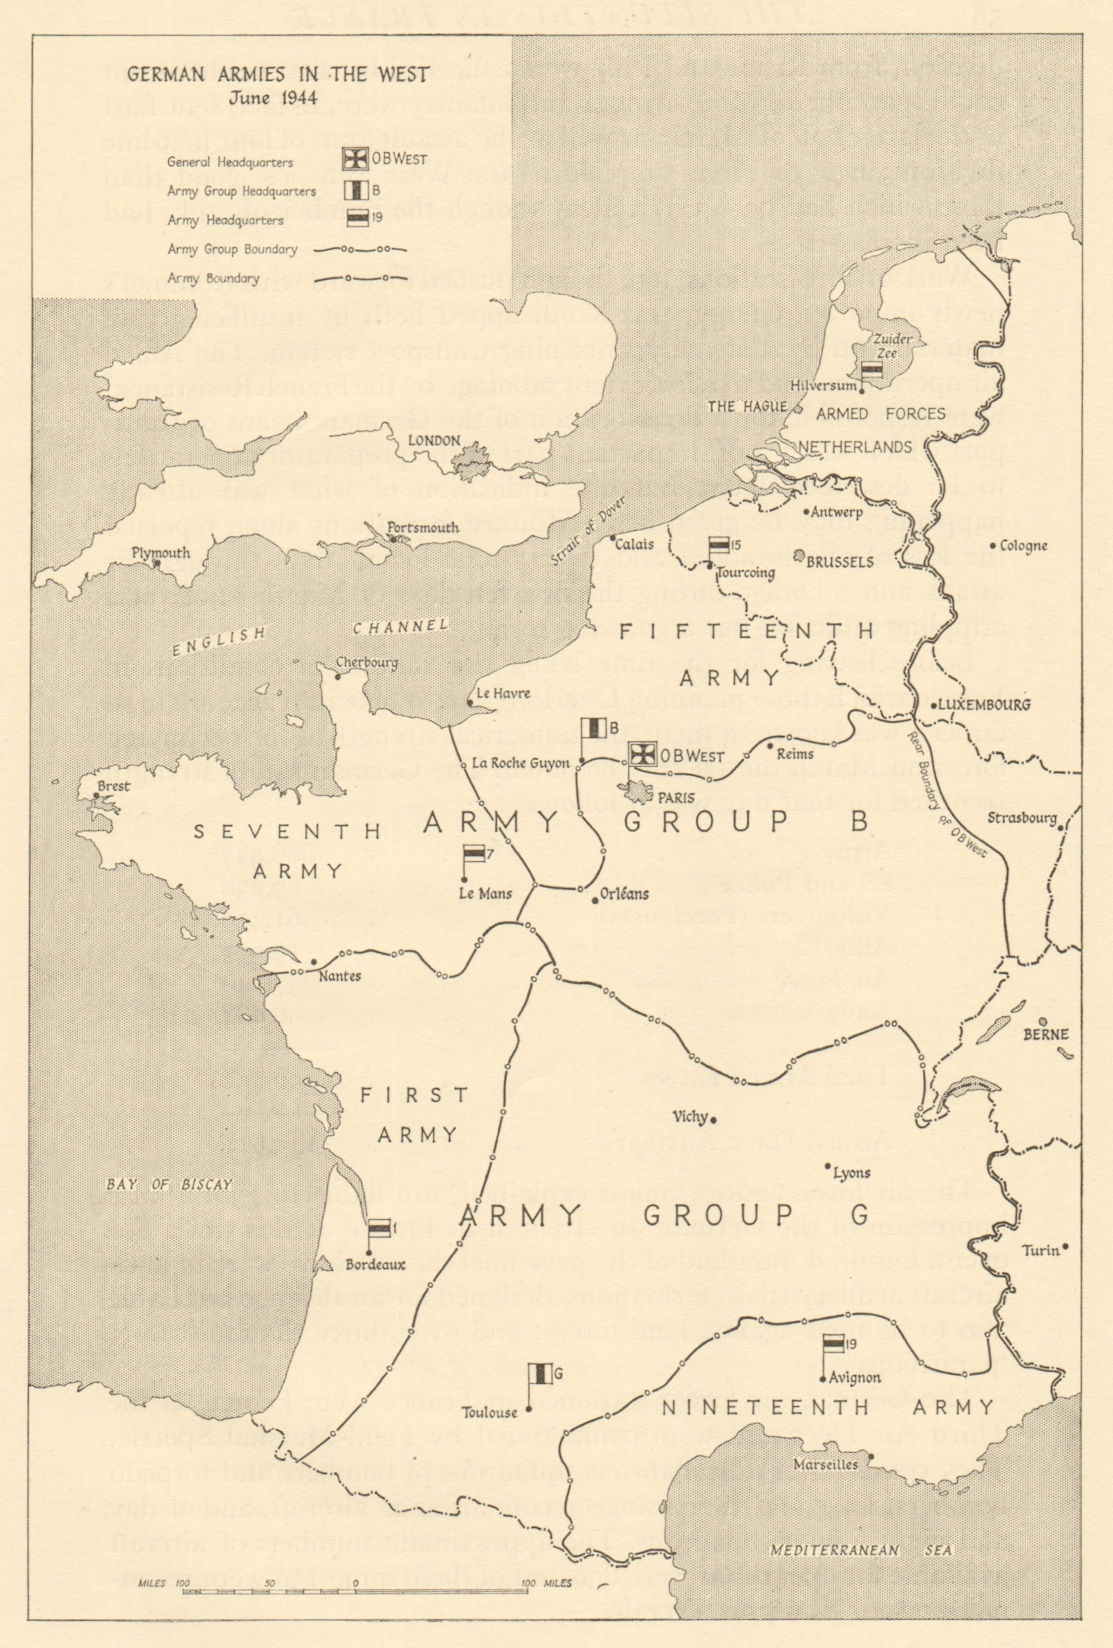 Associate Product German Armies in the West, June 1944. Operation Overlord/Neptune. D-Day 1962 map